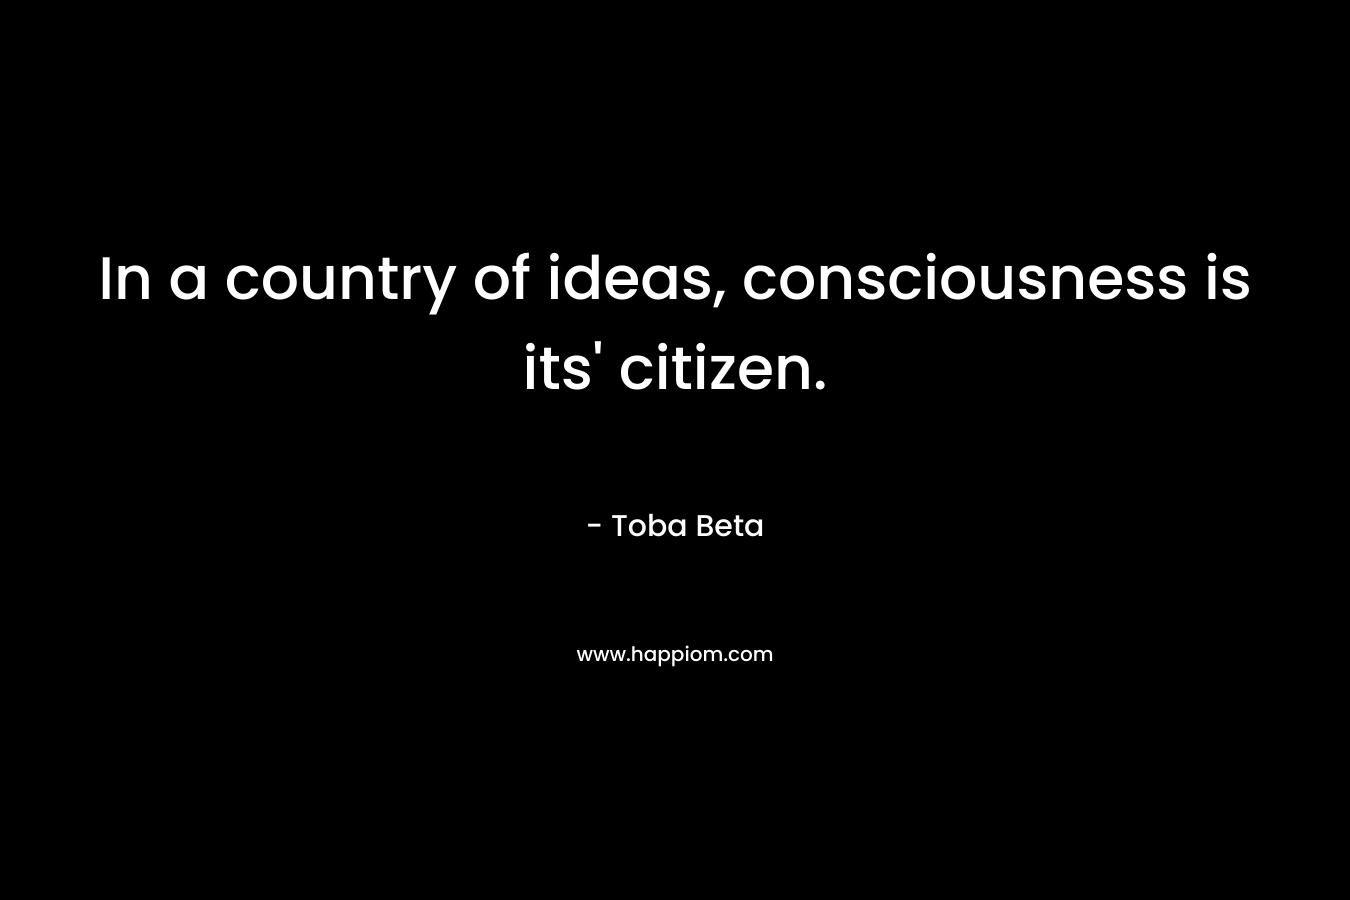 In a country of ideas, consciousness is its’ citizen. – Toba Beta